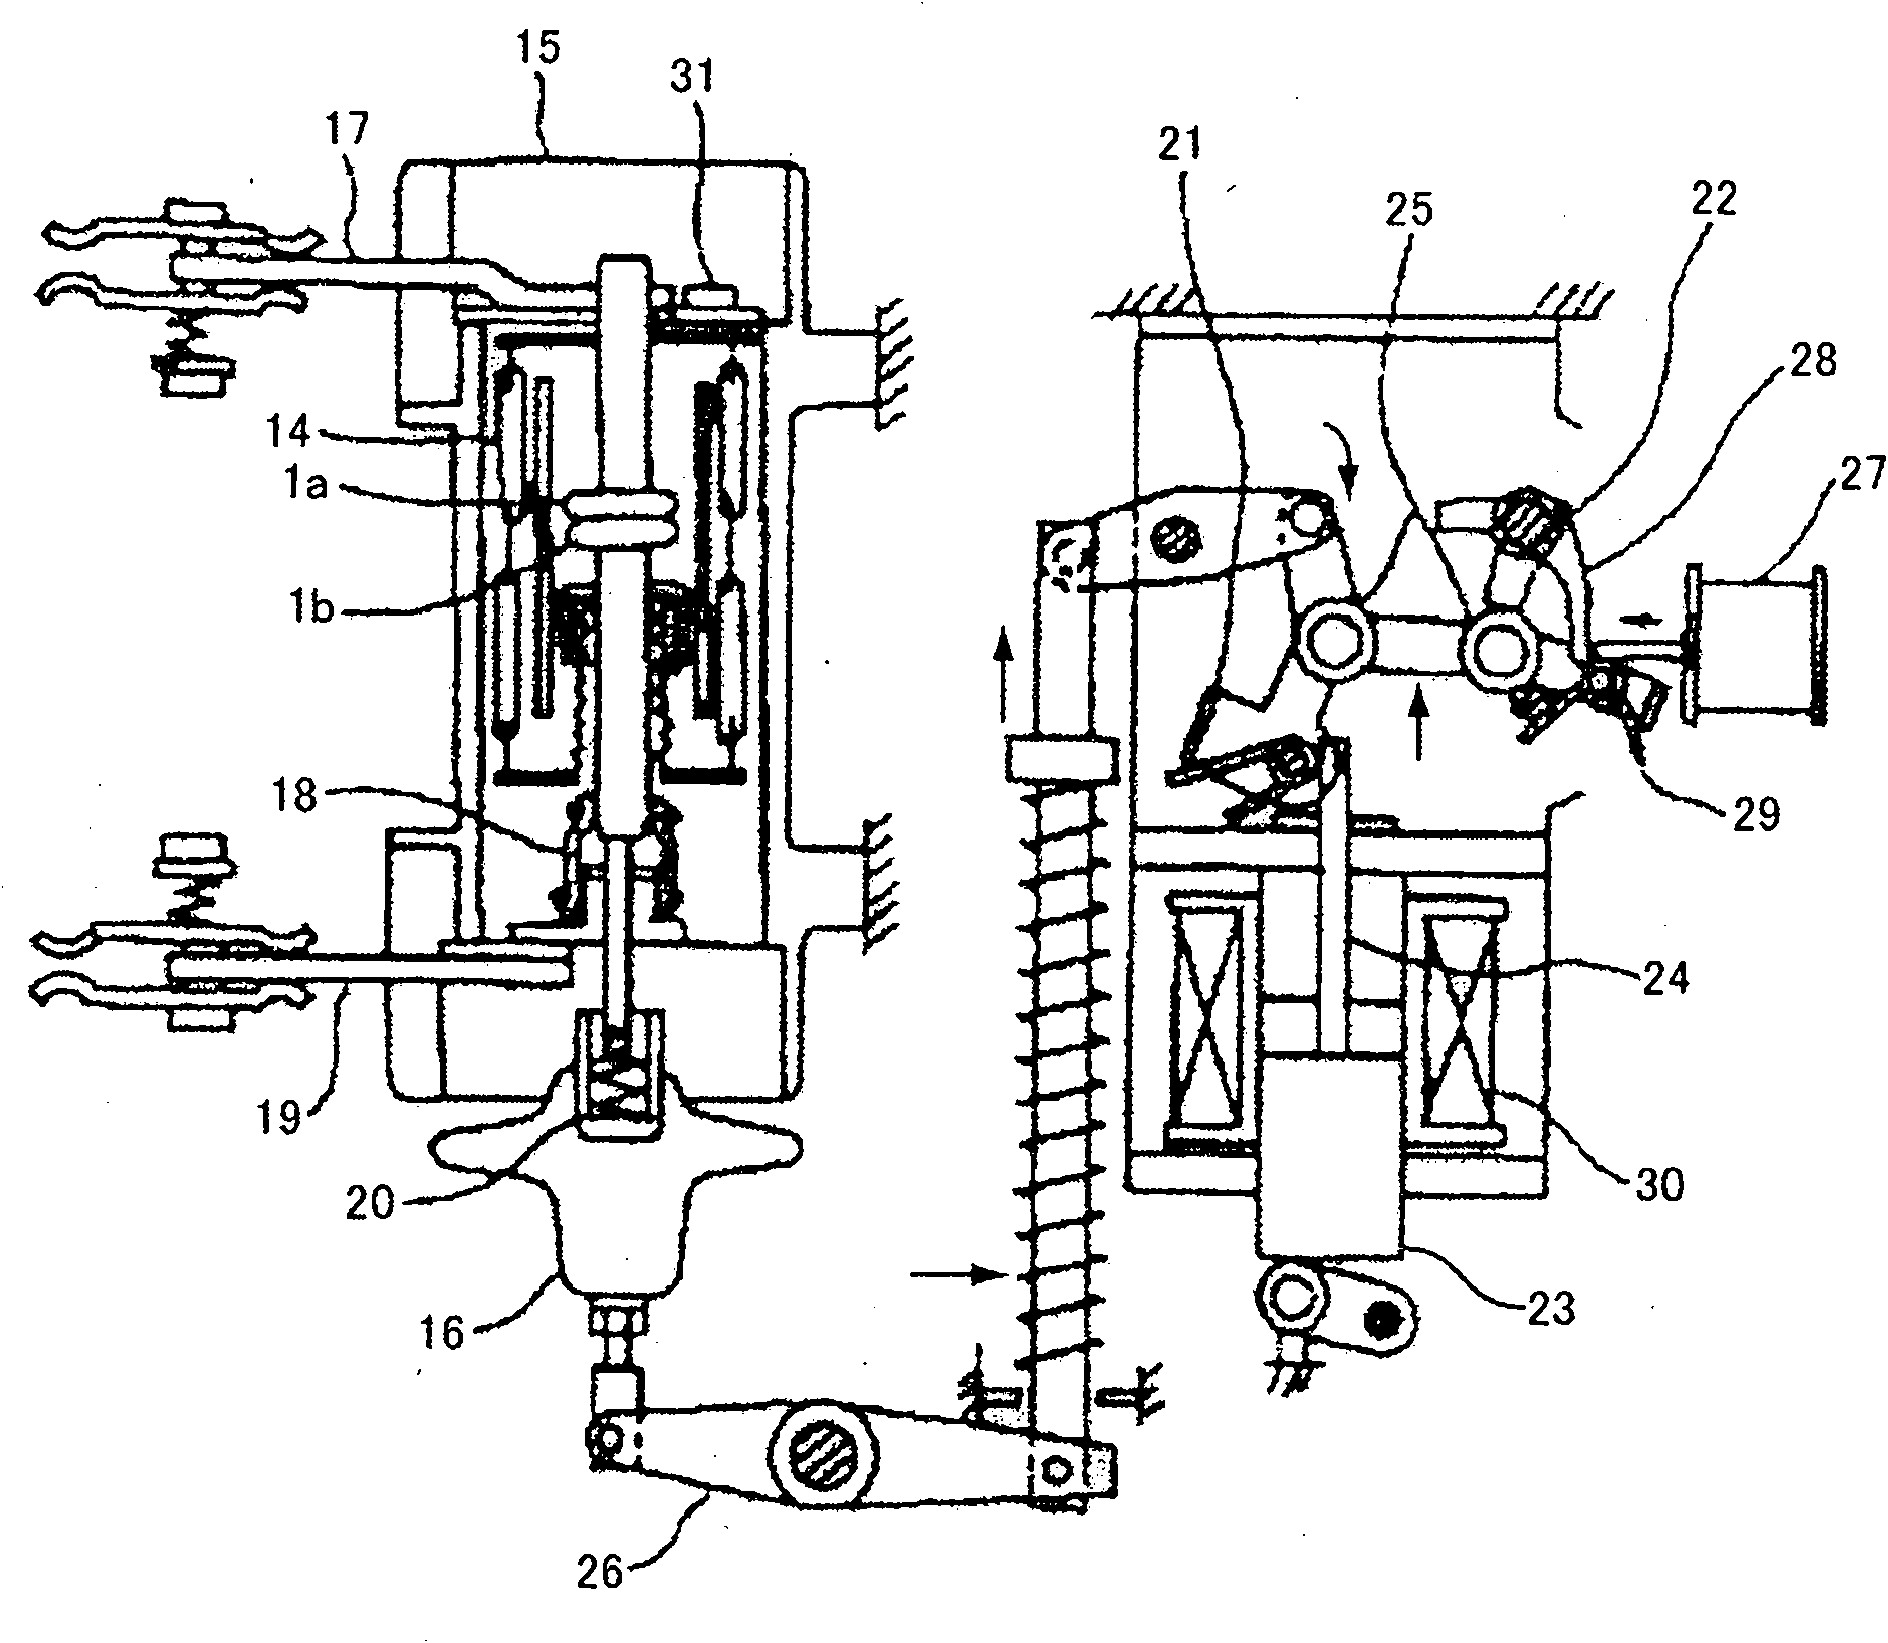 Electric contact for vacuum valve and vacuum interrupter using the same